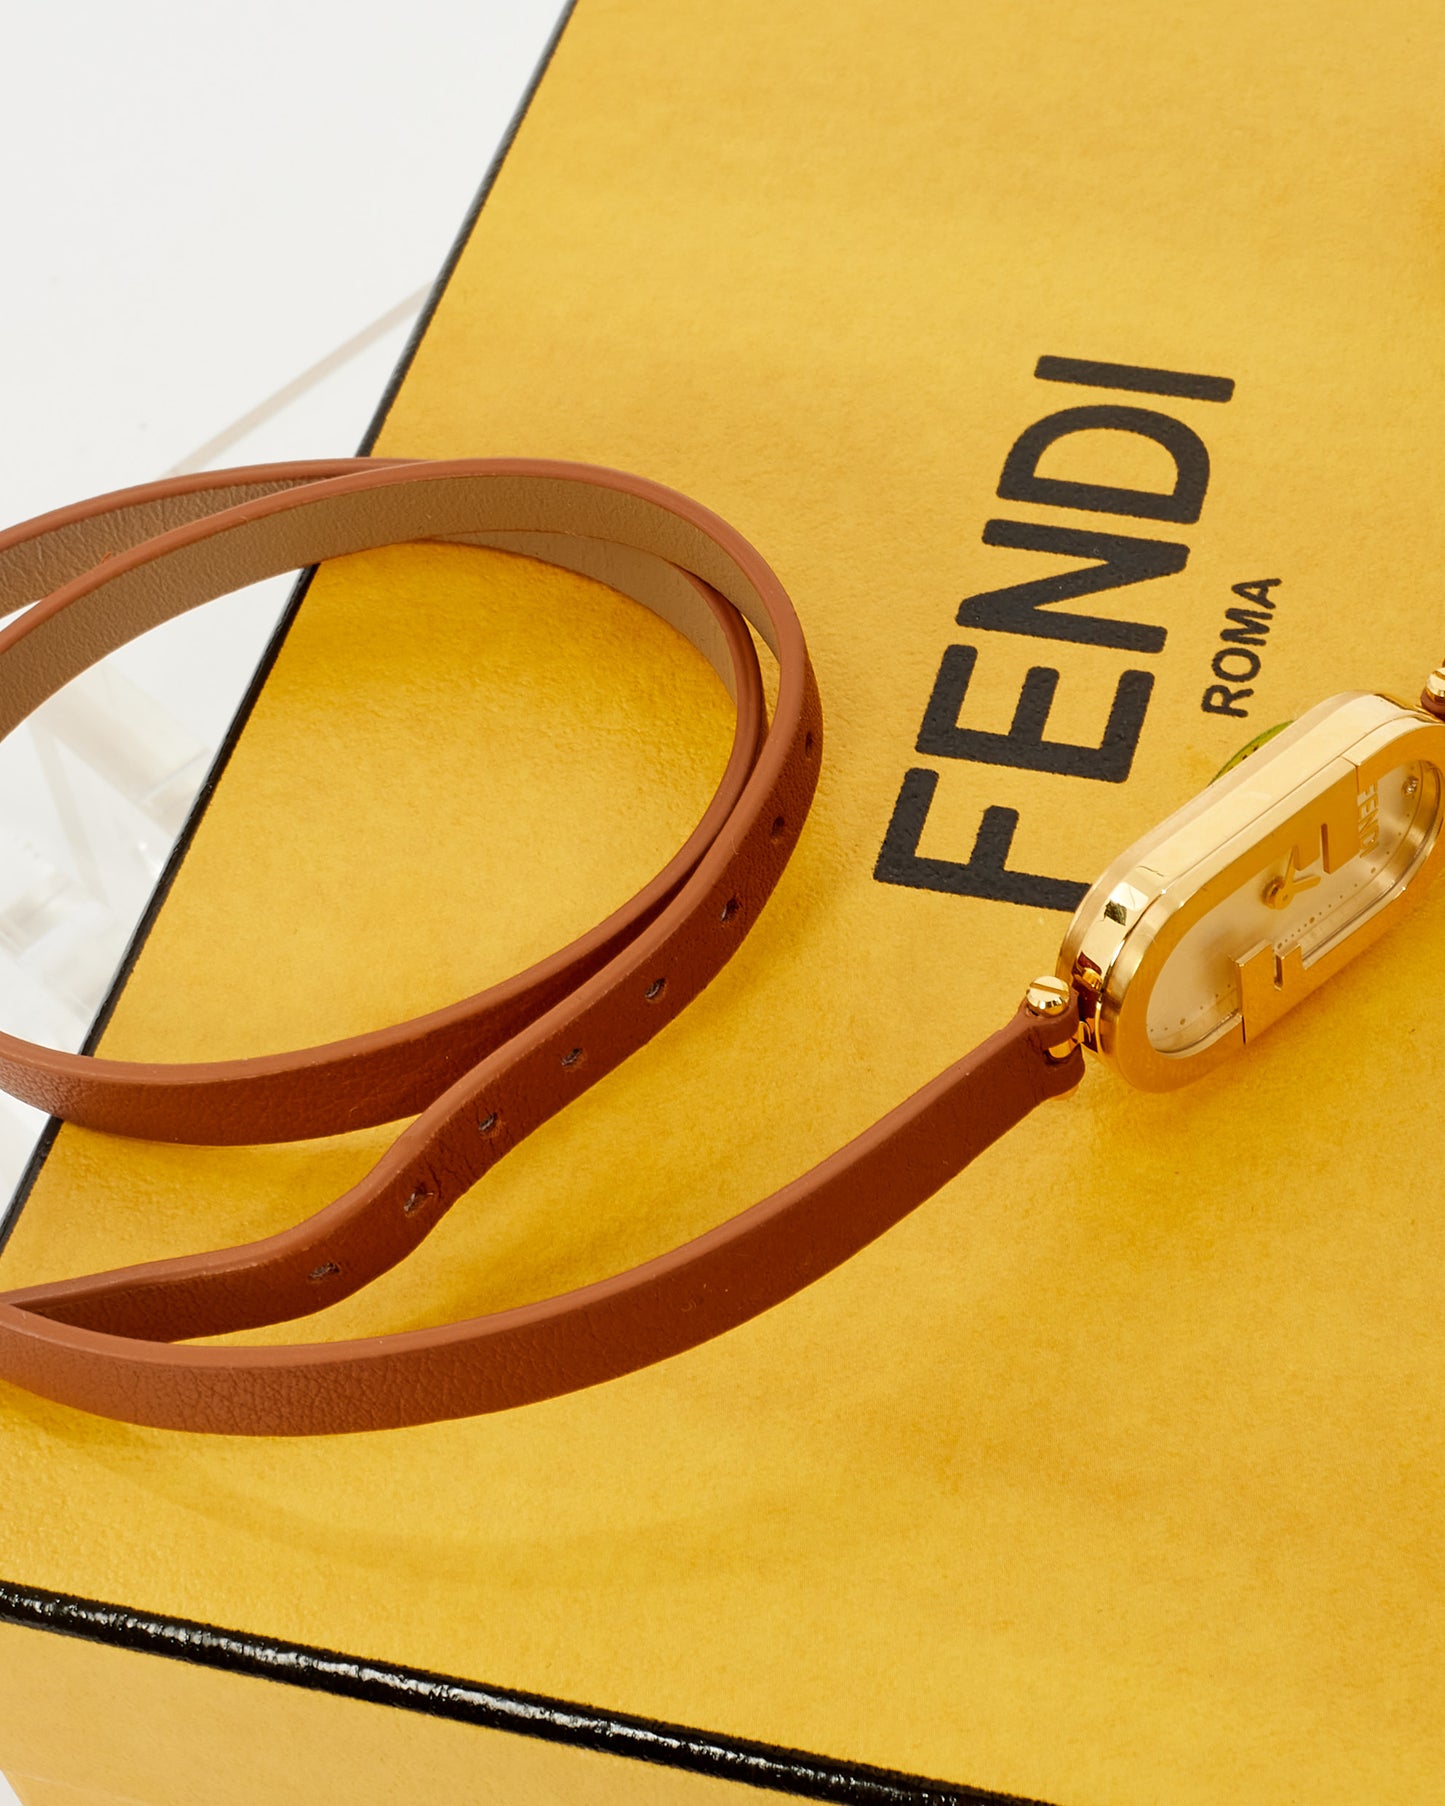 Fendi Brown Leather & Gold O'Lock Oval Double Strap Logo Watch